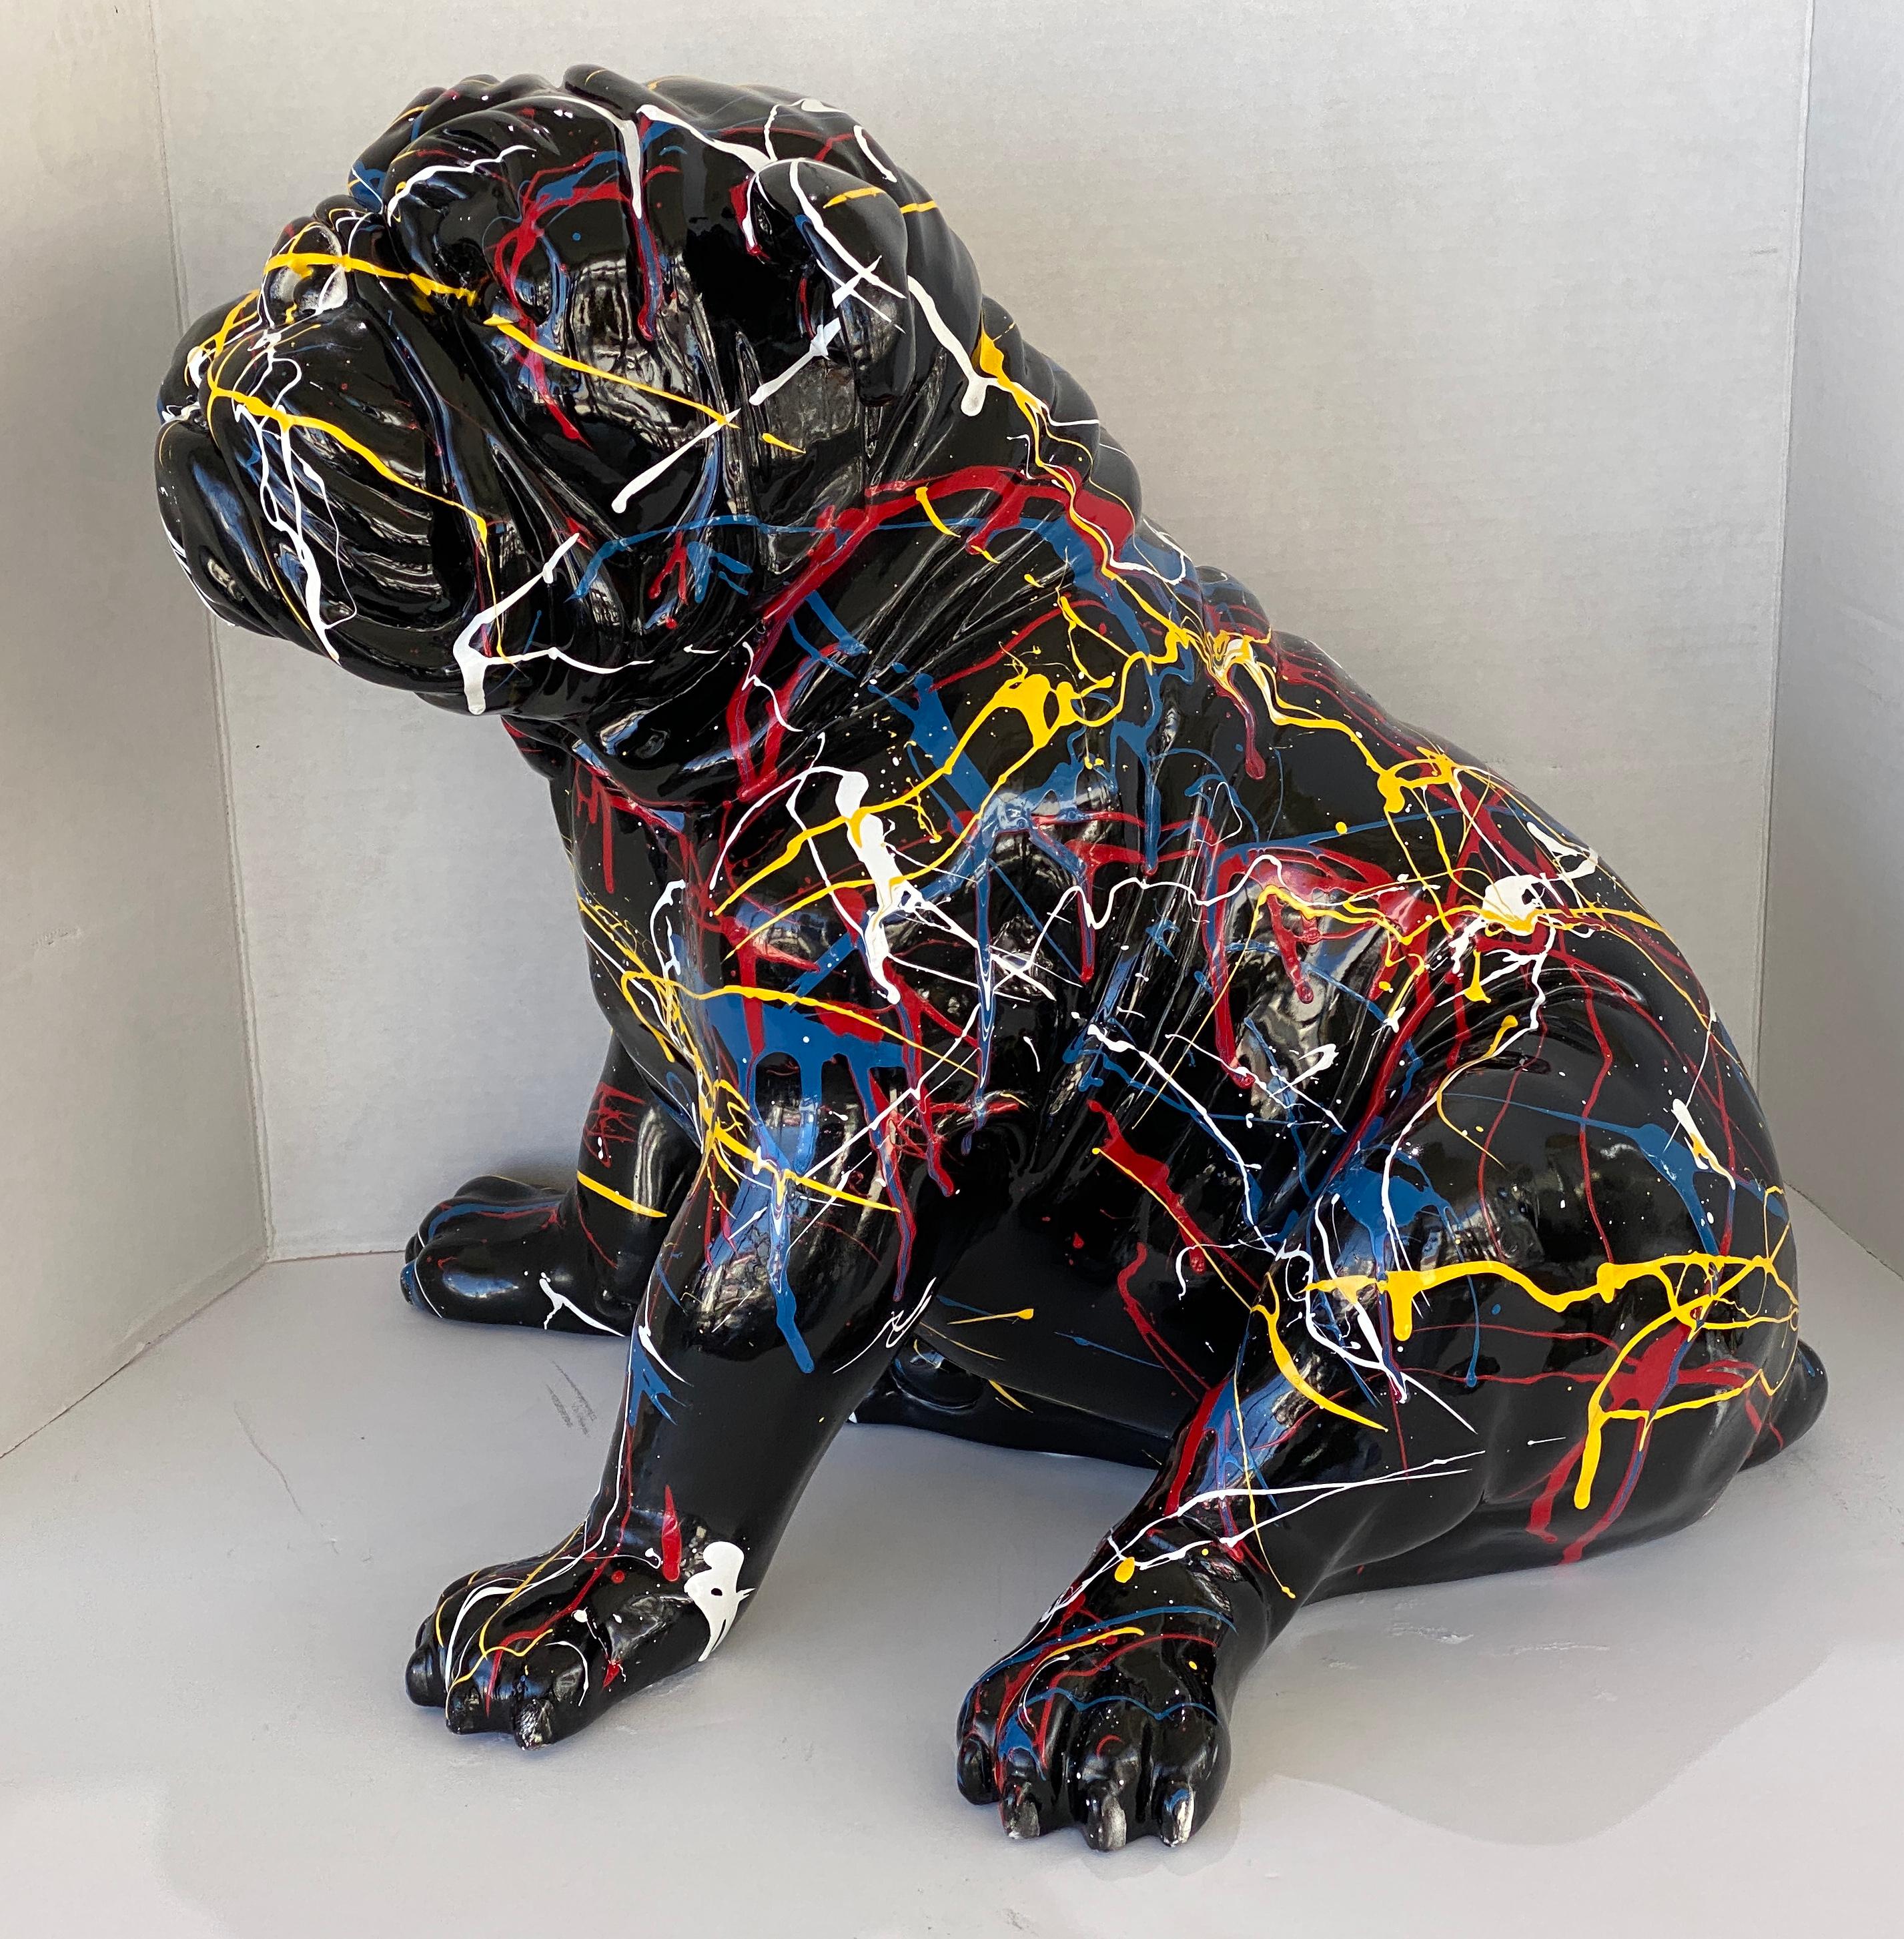 This stylish, chic and charming sculpture of a bulldog was created by the American artist Jeff Diamond, and the piece is fabricated in resin with a hand-painted, multi-colored drip pattern.

Note: Signed by the artist on the verso.